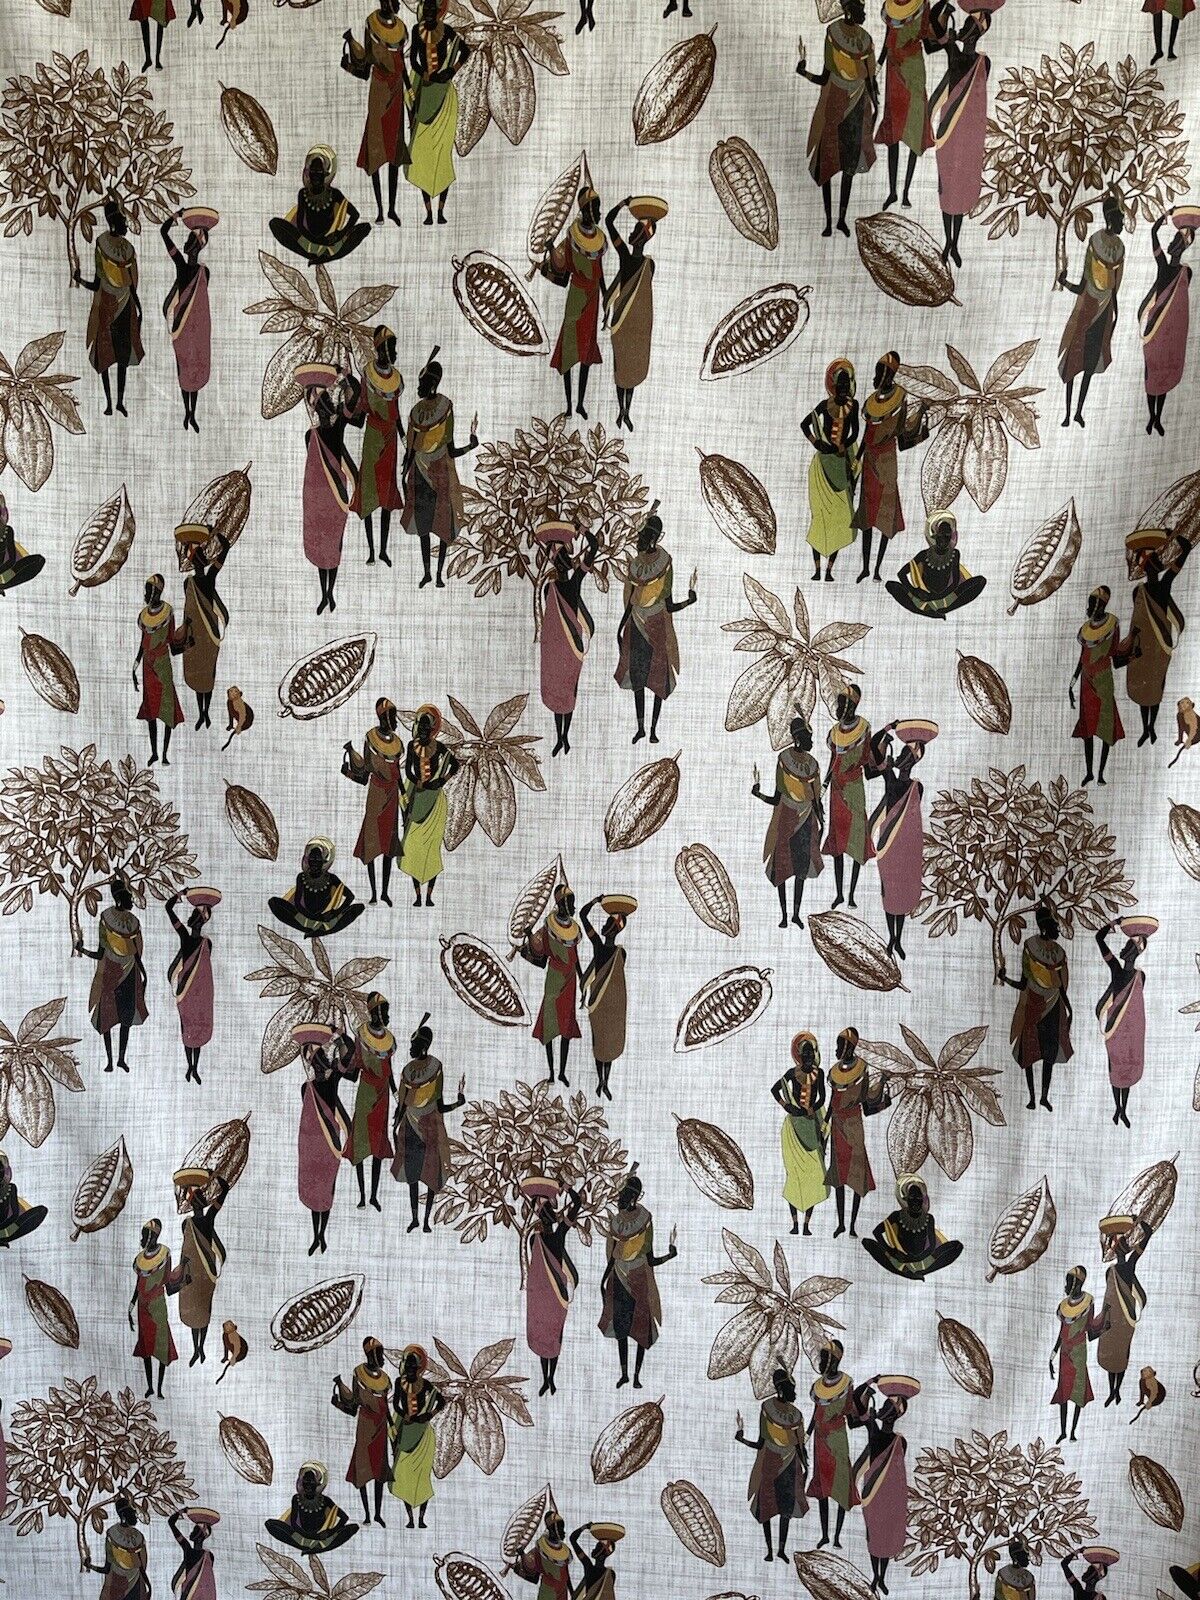 African People Toile Print Cotton Fabric Panel of 100cm Baobab Fruit Tree Leaves Brown Textile